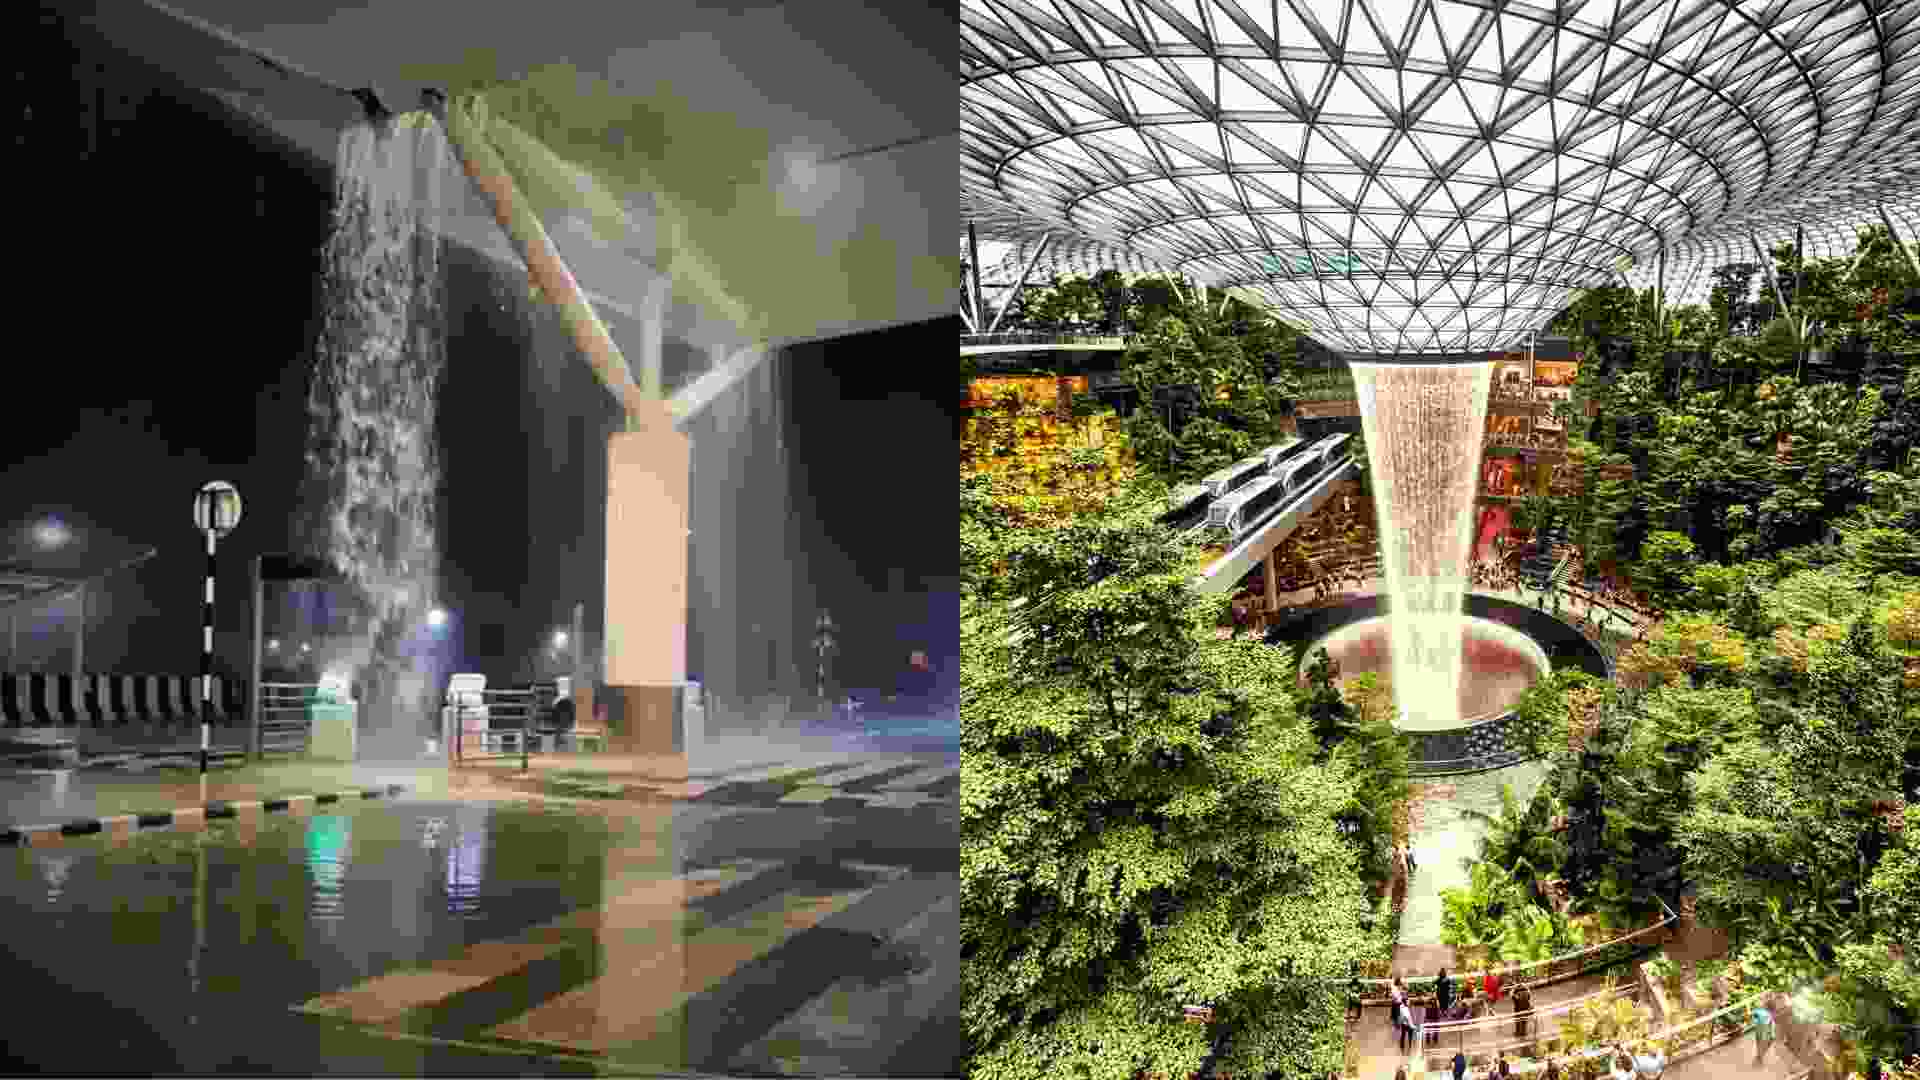 Delhi Airport ‘Waterfall’ Sparks Sarcastic Comparisons To Singapore Changi Fountain | Viral